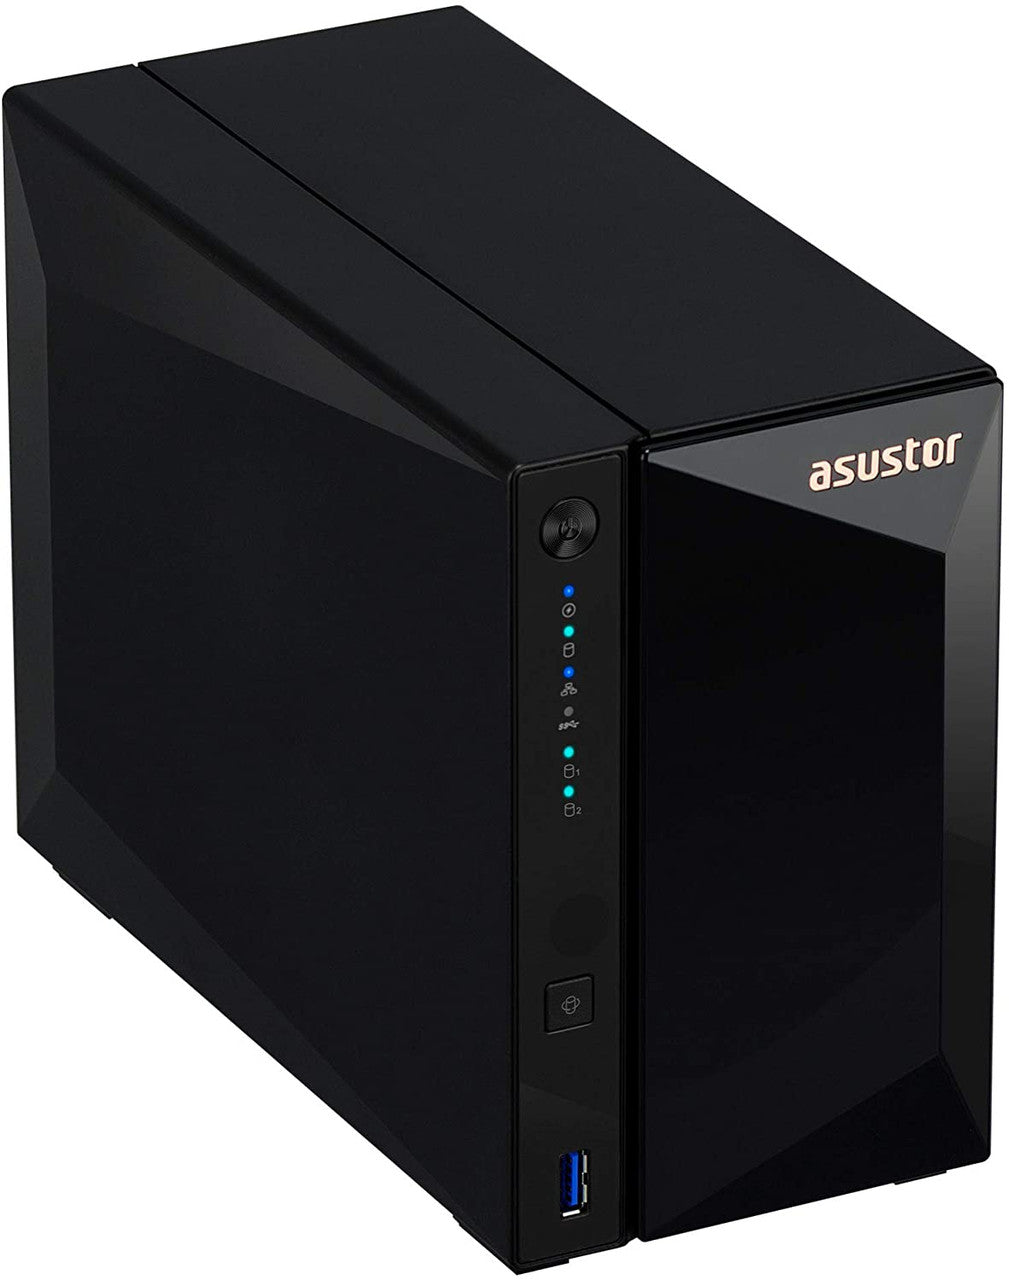 Asustor AS3302T 2-Bay Drivestor 2 PRO NAS with 2GB RAM and 12TB (2x6TB) Seagate Ironwolf PRO Drives Fully Assembled and Tested